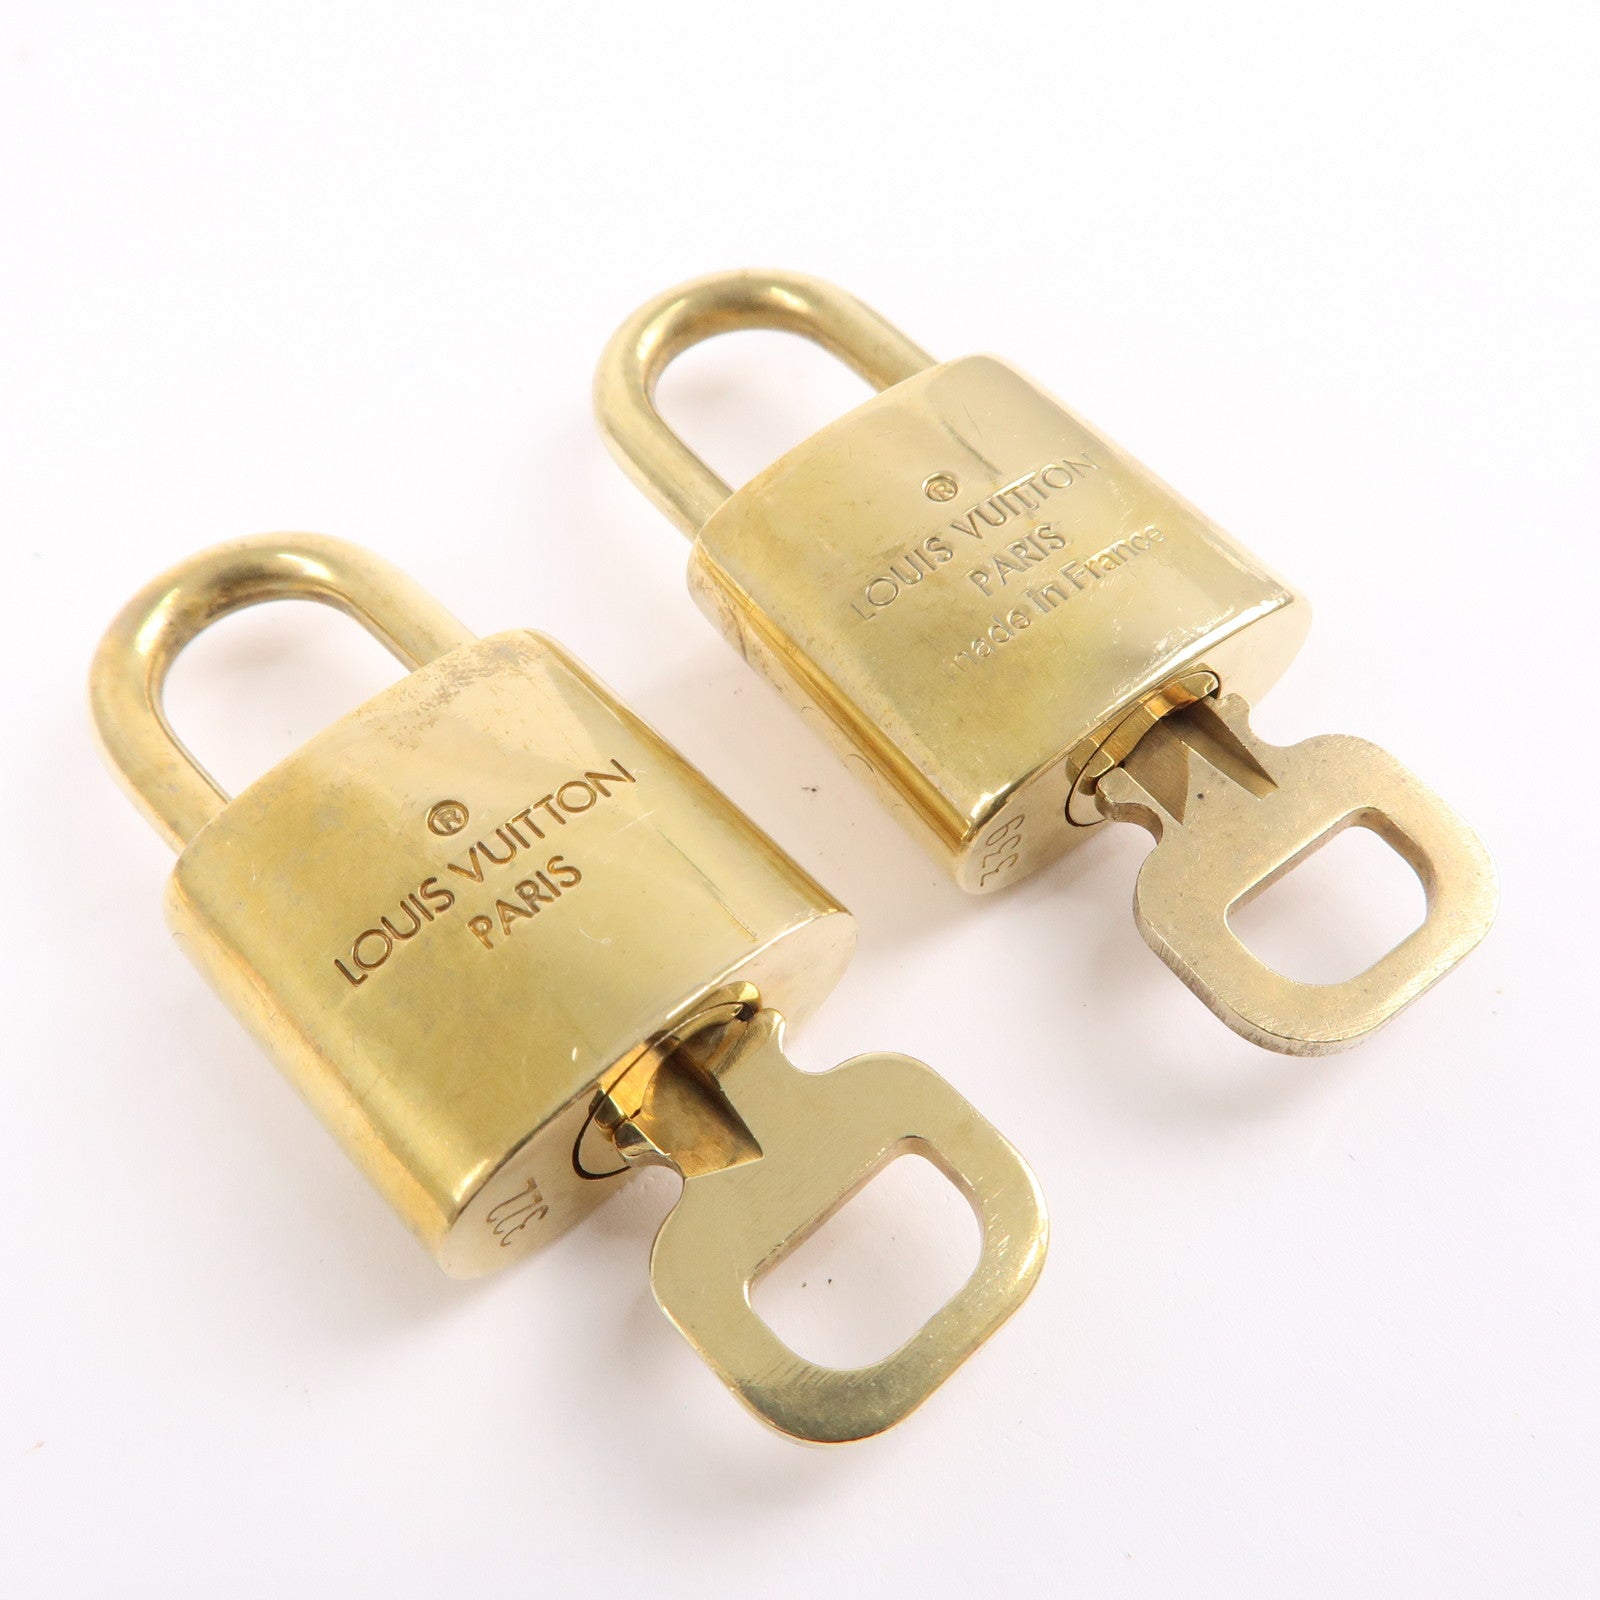 Buy Authentic Louis Vuitton Gold Brass Lock and Key Set 339 Online